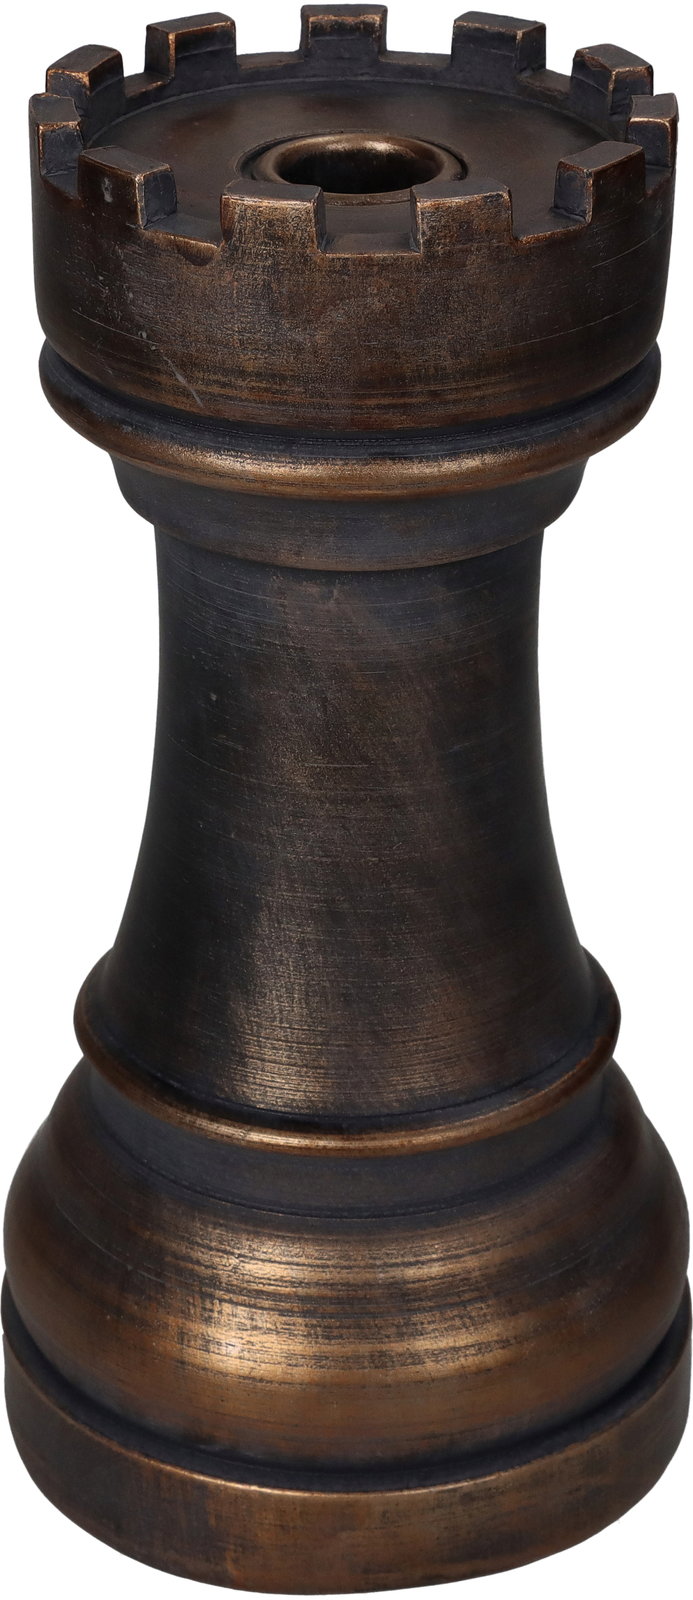 Candle Holder Chess Piece Polyresin Black 11x11x22.5cm